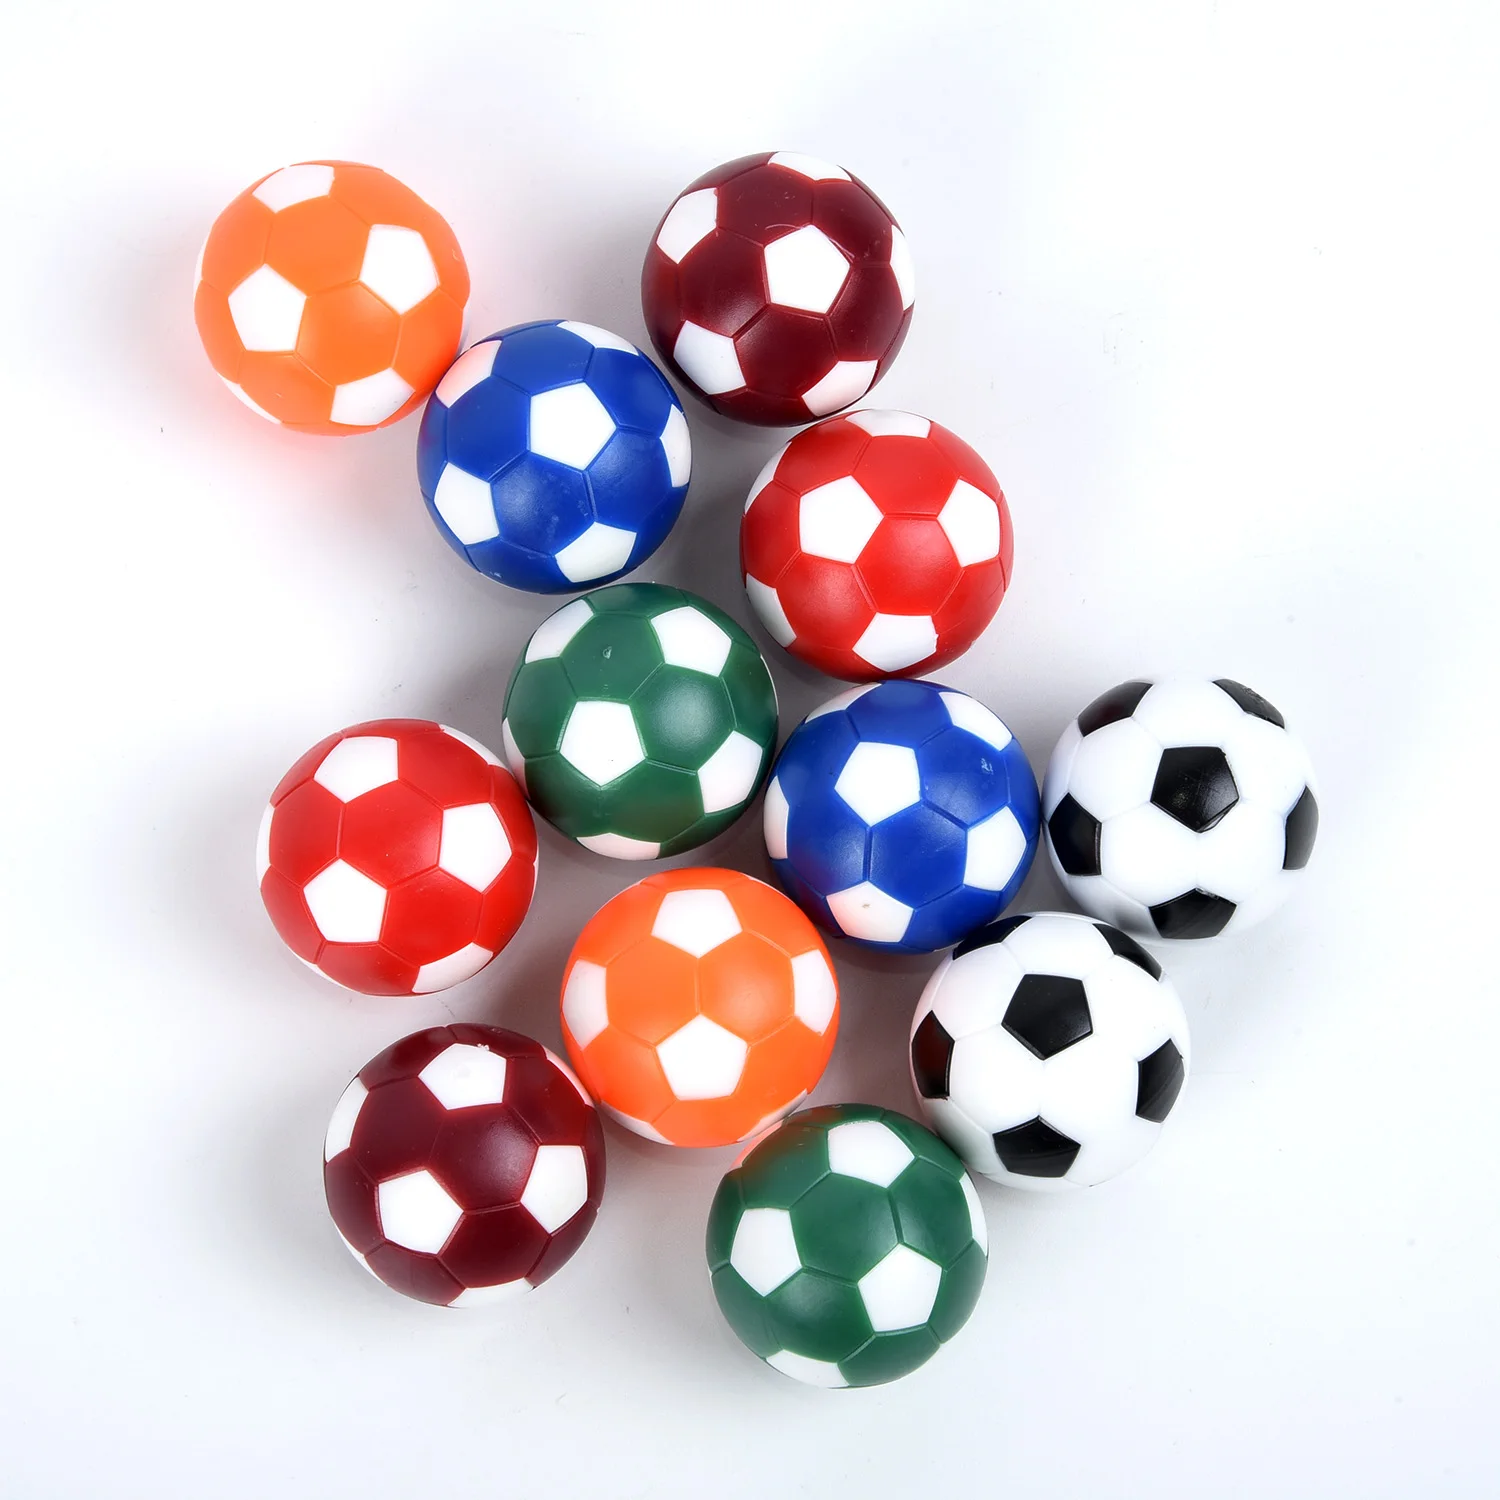 

12Pcs Colorful Foosball Table Soccer Balls Mini Table Football Indoor Game Kid Play Toys Plastic Sport Soccer Tables 32MM